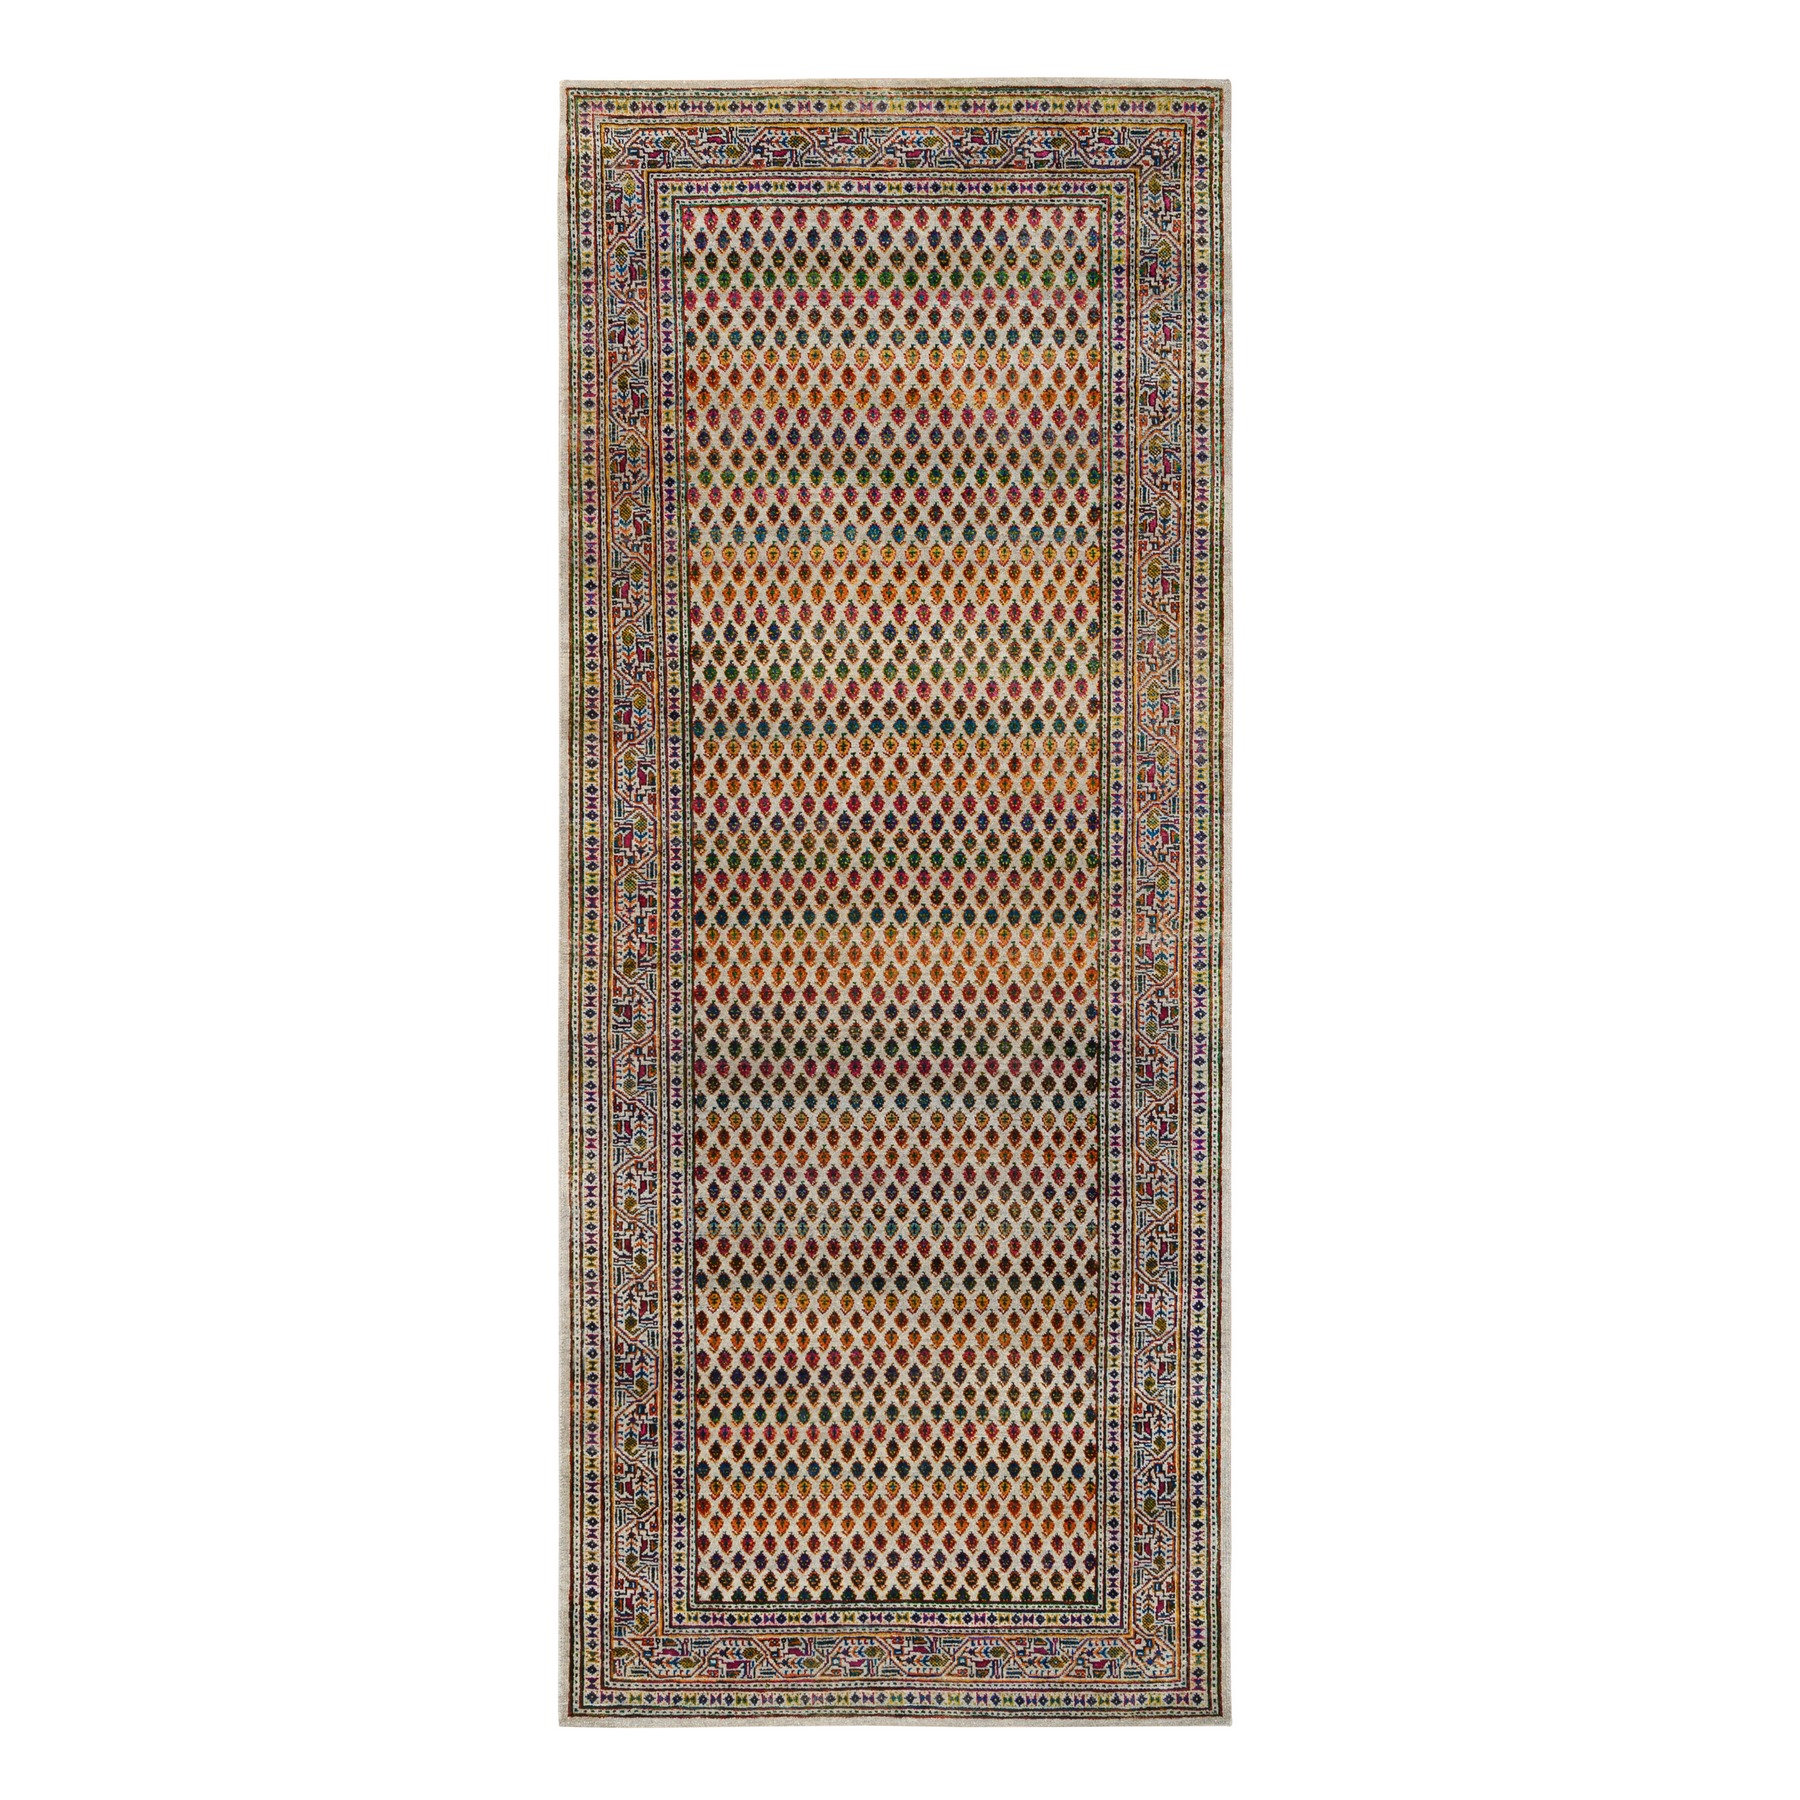 Woolen and silk hand knotted oriental rugs - merchant of Asia